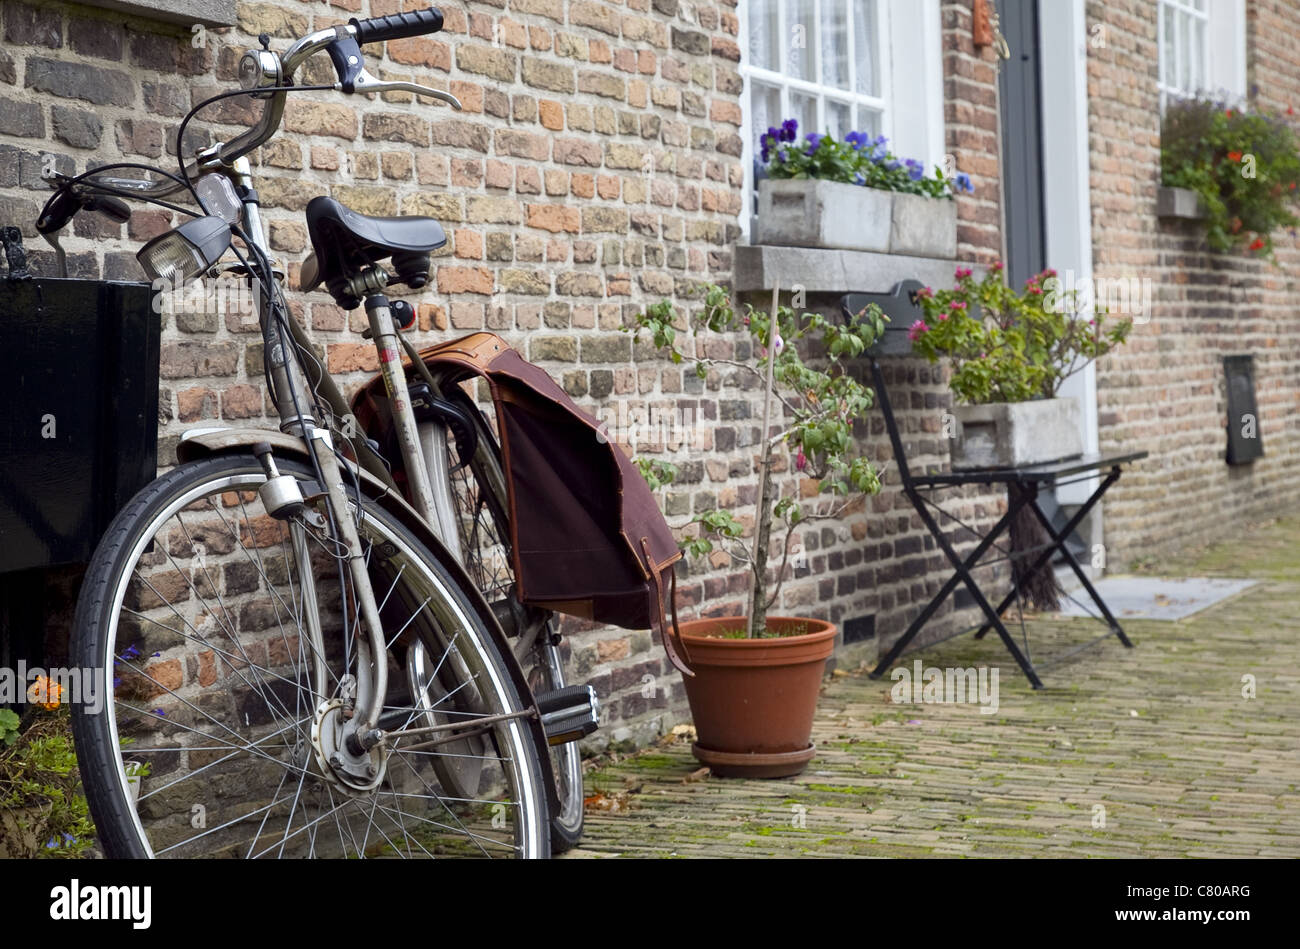 A colour photo in Bread, Holland, with a very Dutch feel. A Bicycle, and flower boxes on windowsills against an old brick home. Stock Photo